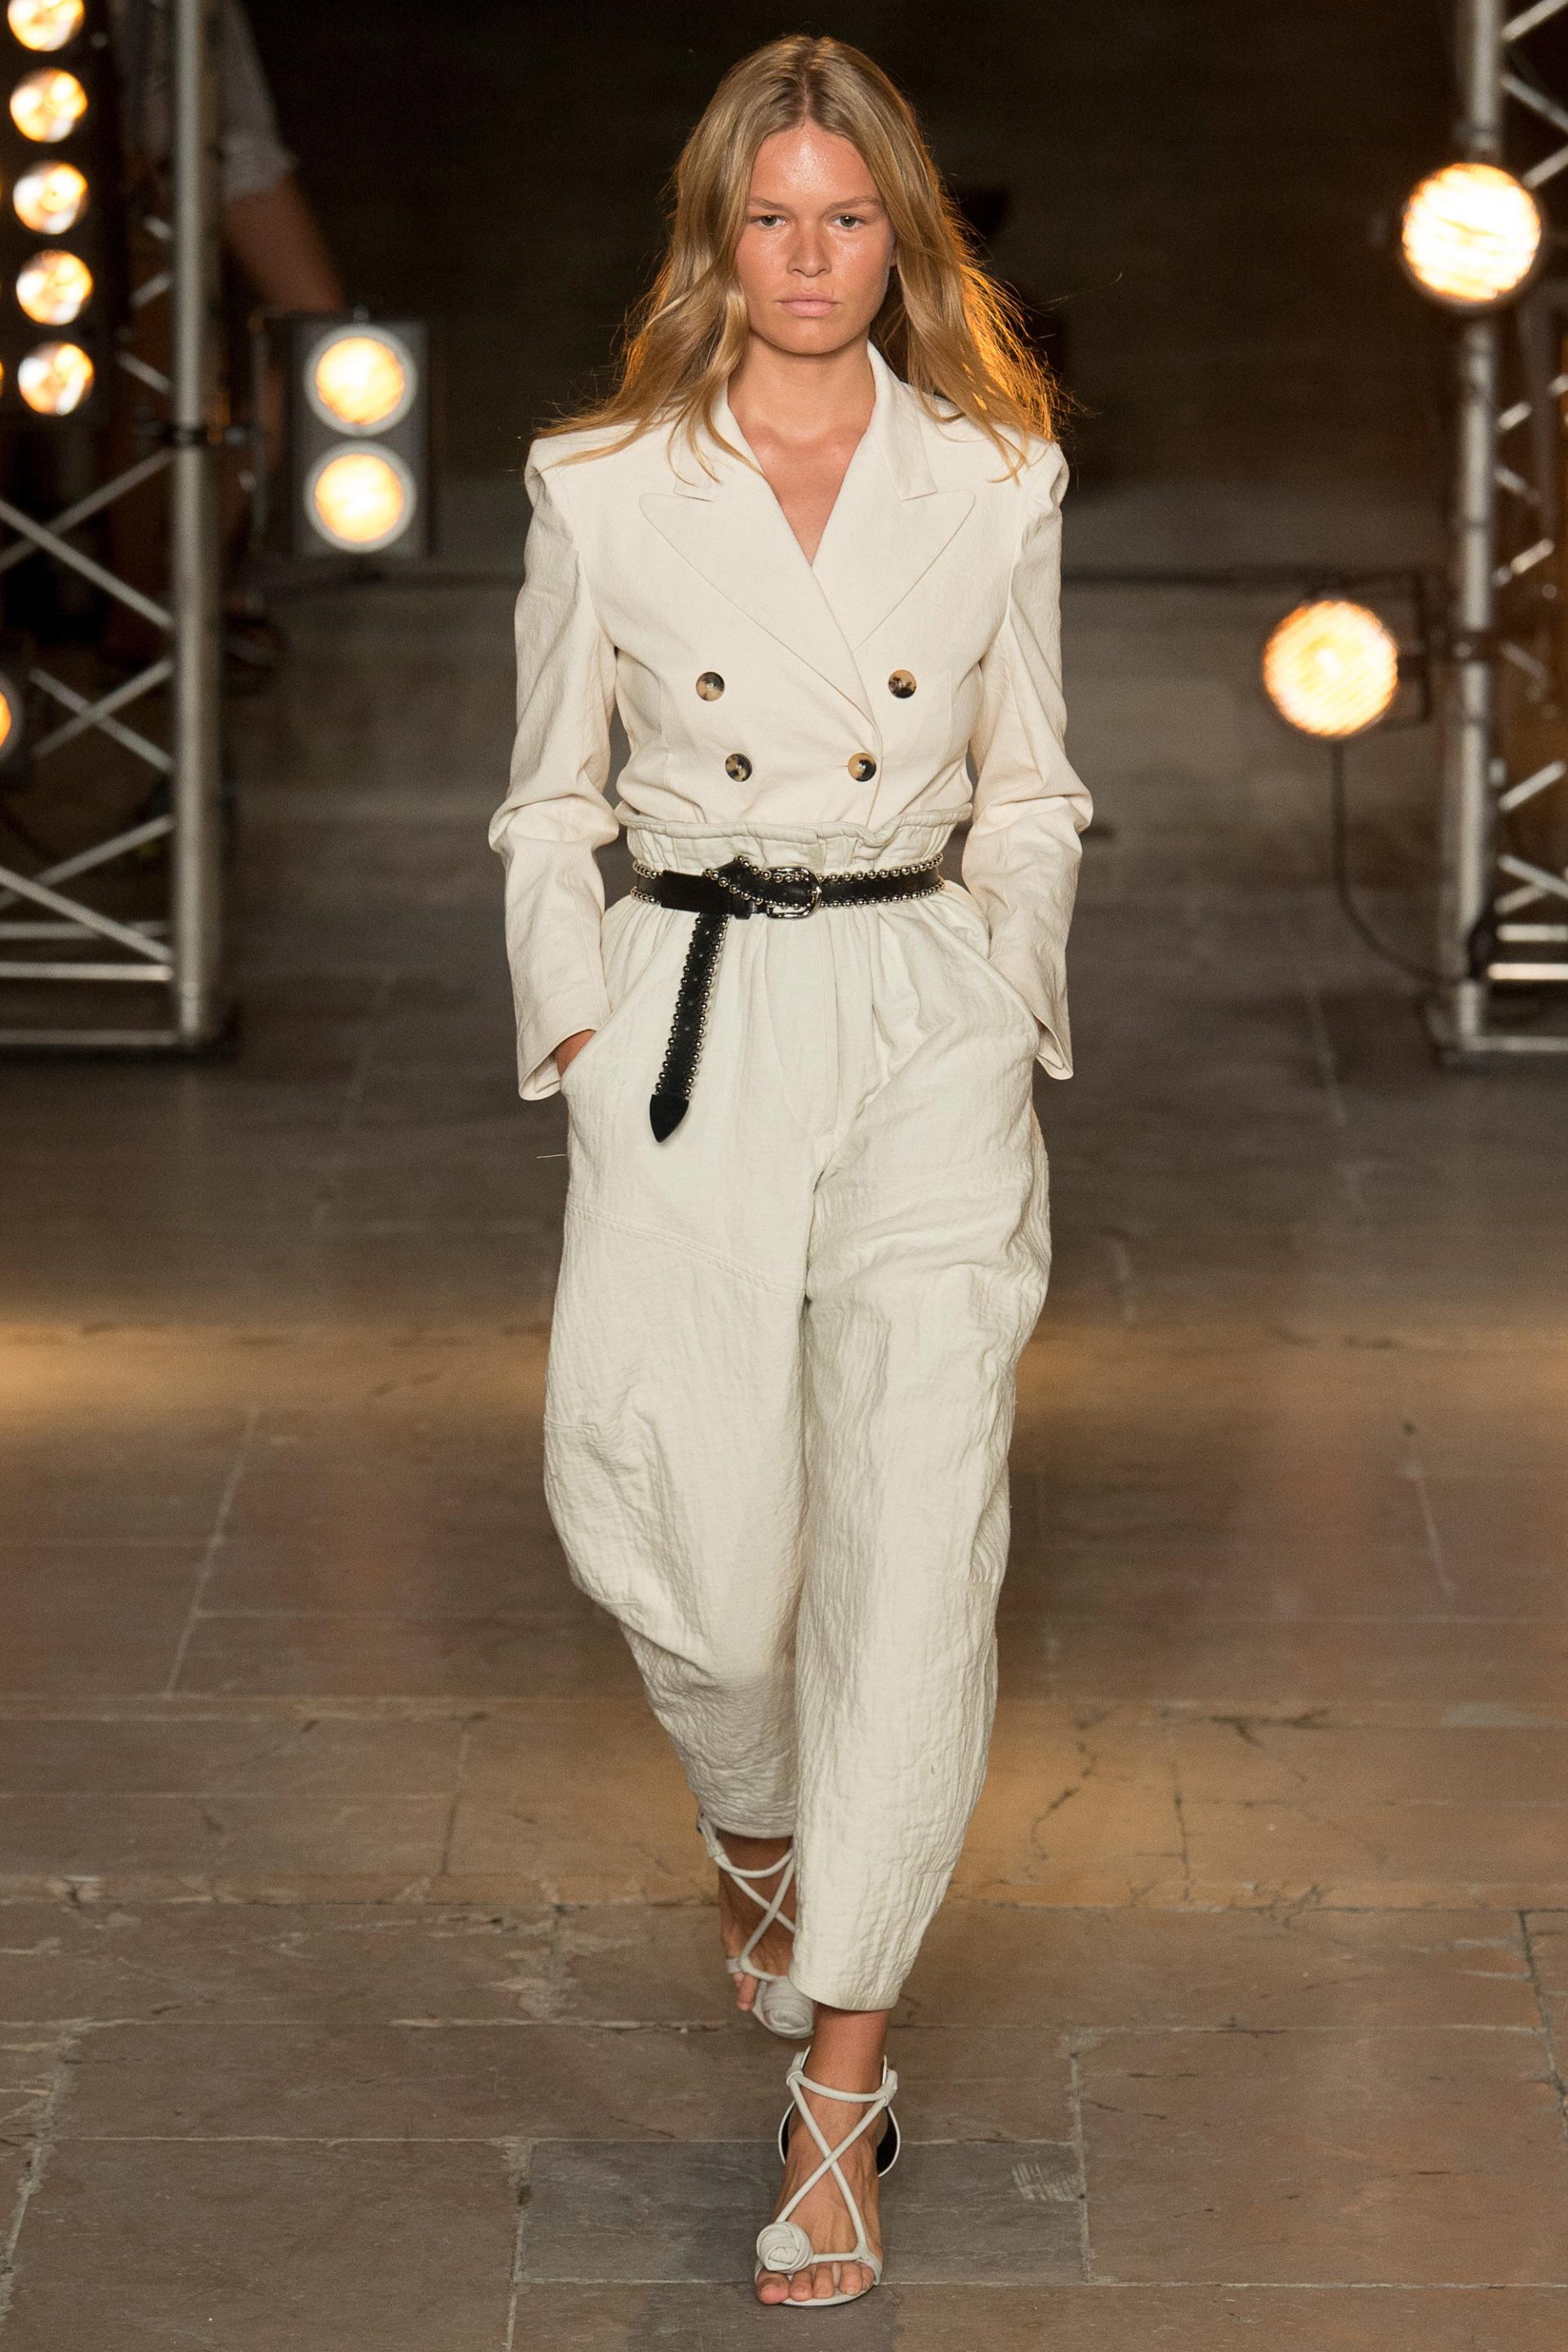 White pant suit cinch with a belt at the waist